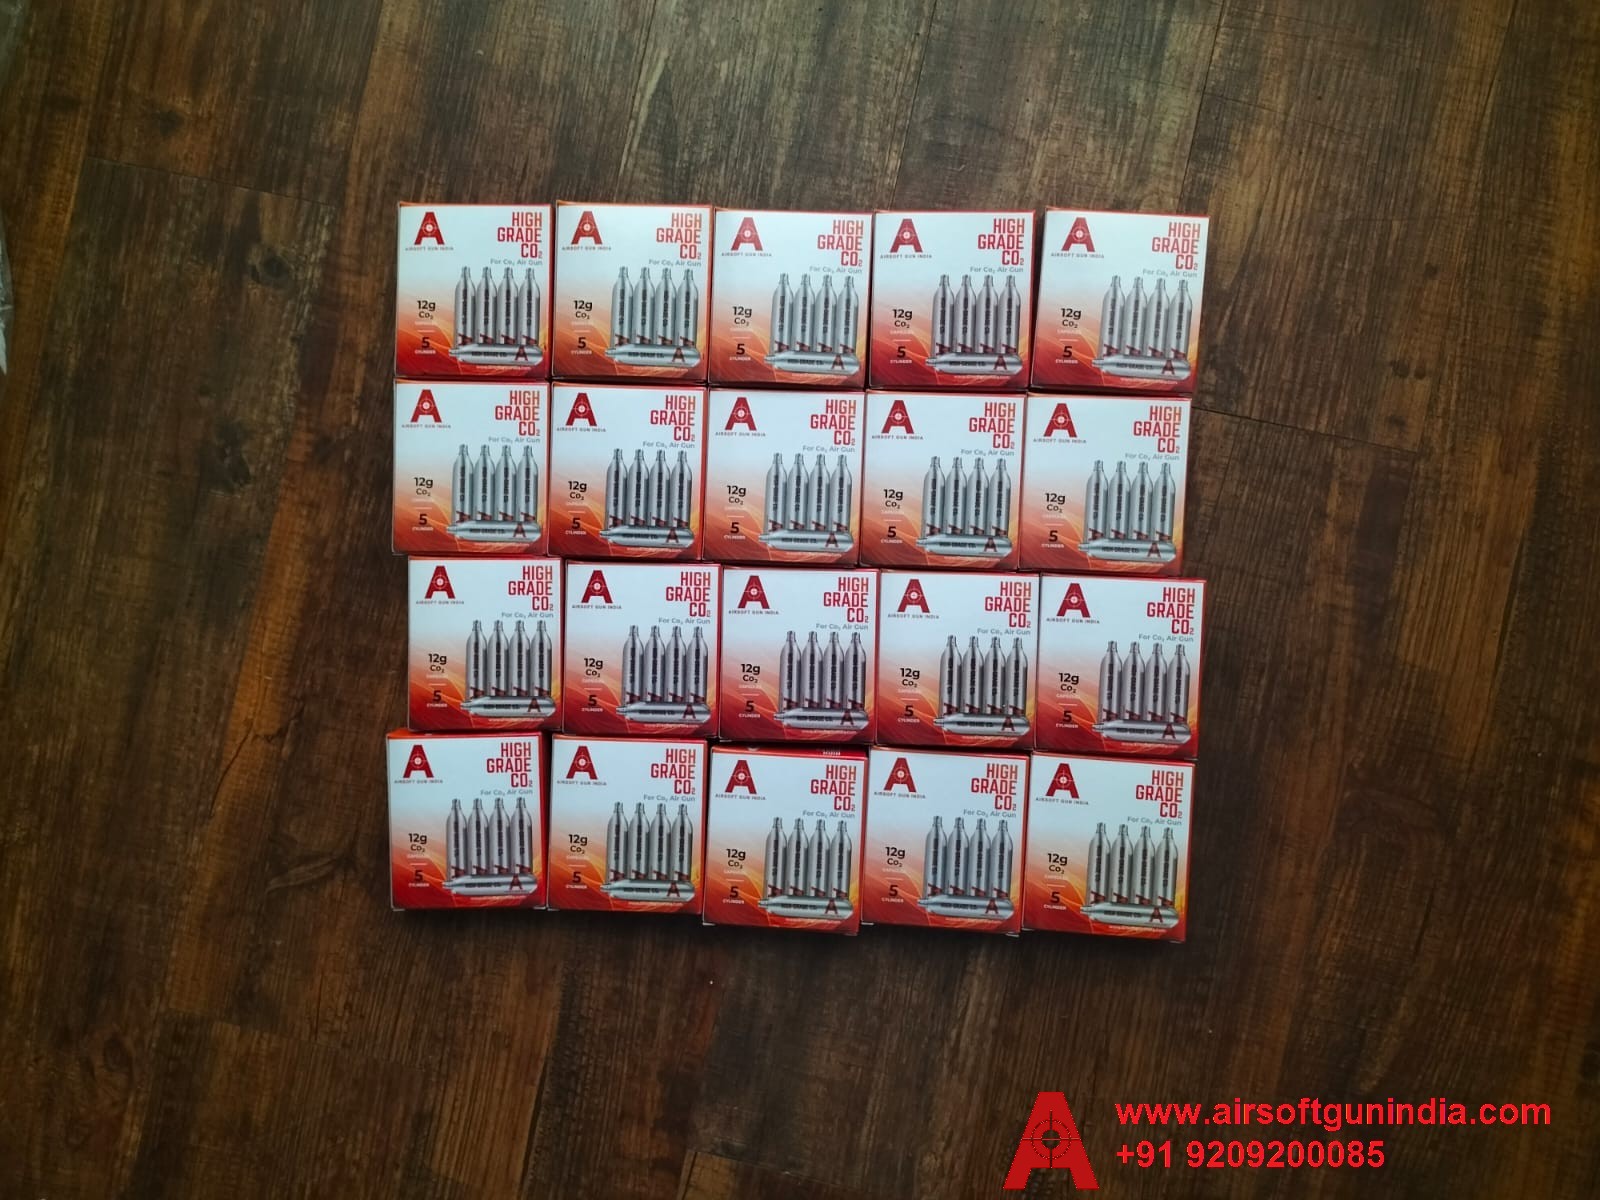 12 G Co2 Cartridges Pack Of 100 For Co2 Guns BY AIRSOFT GUN INDIA